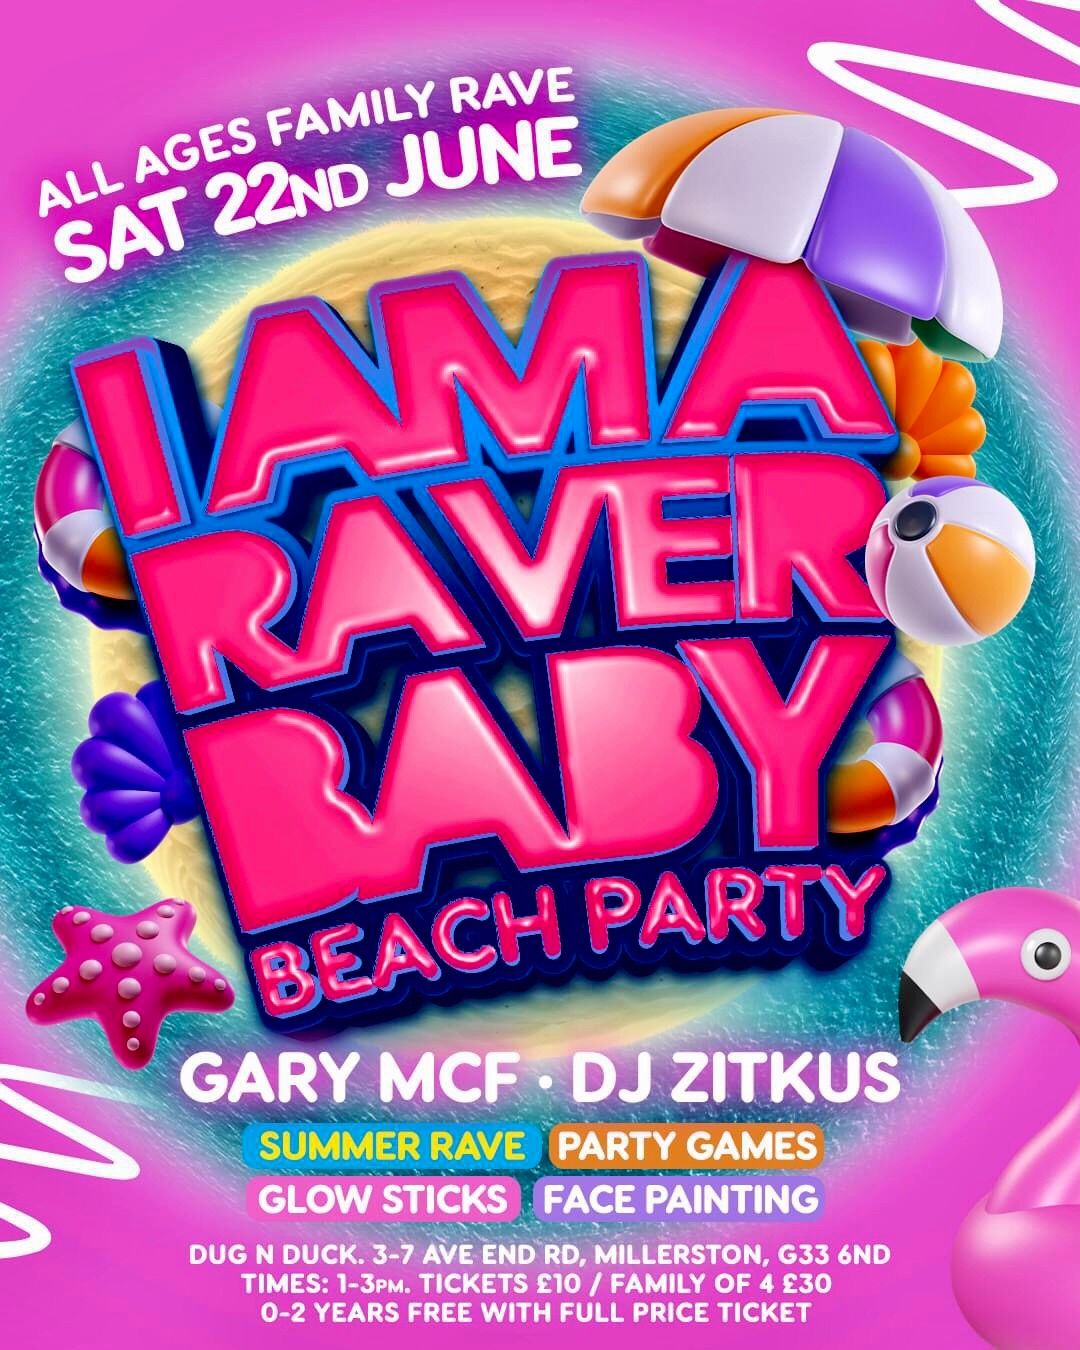 I AM A RAVER BABY SUMMER PARTY